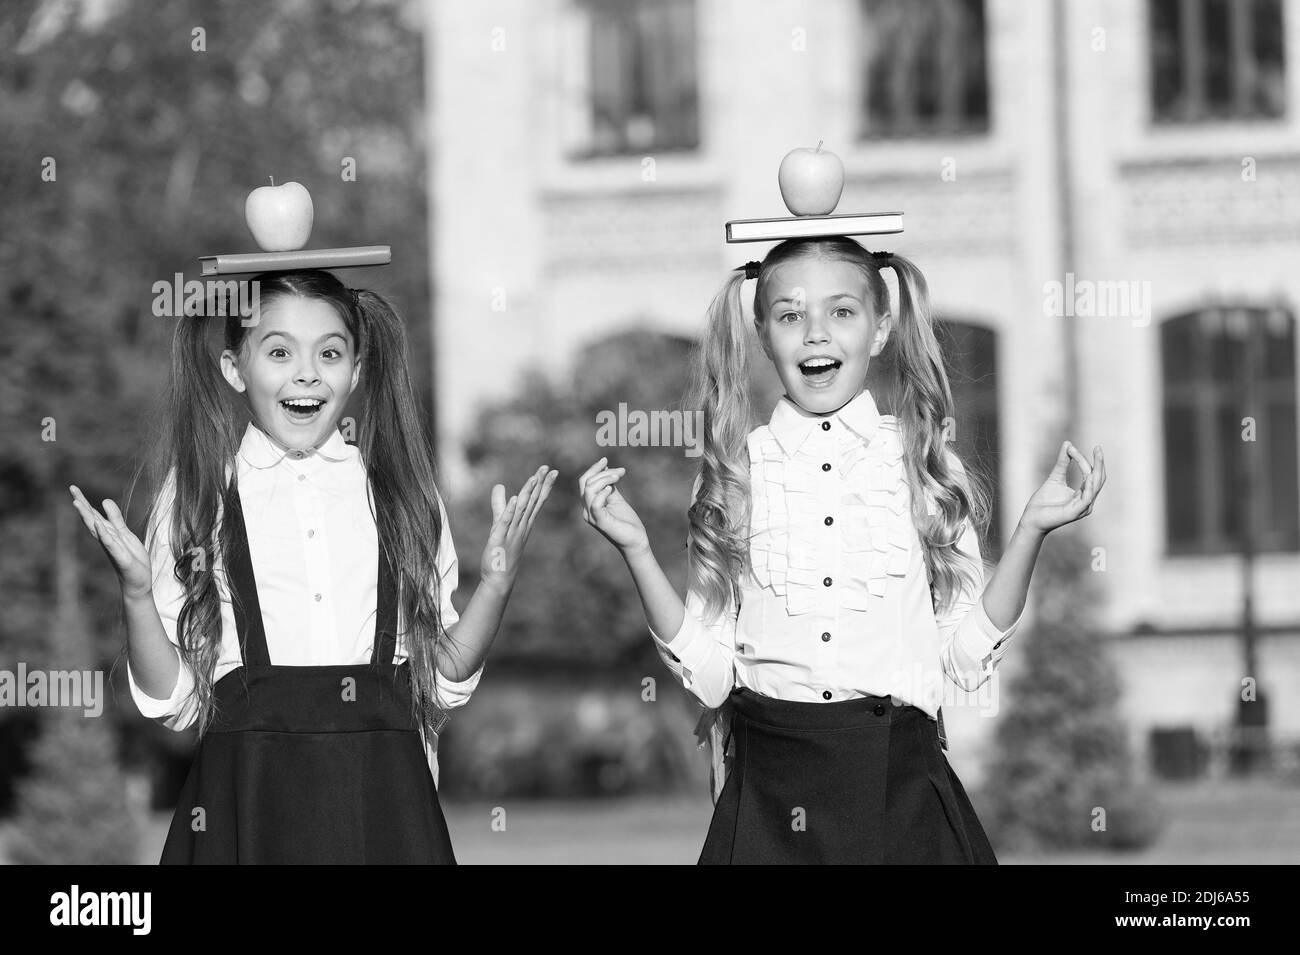 Imagination takes you everywhere. Happy kids hold books and apples on heads. Childhood imagination. School snack. Knowledge and food. Developing imagination. Imagination and fantasy. Relax and create. Stock Photo